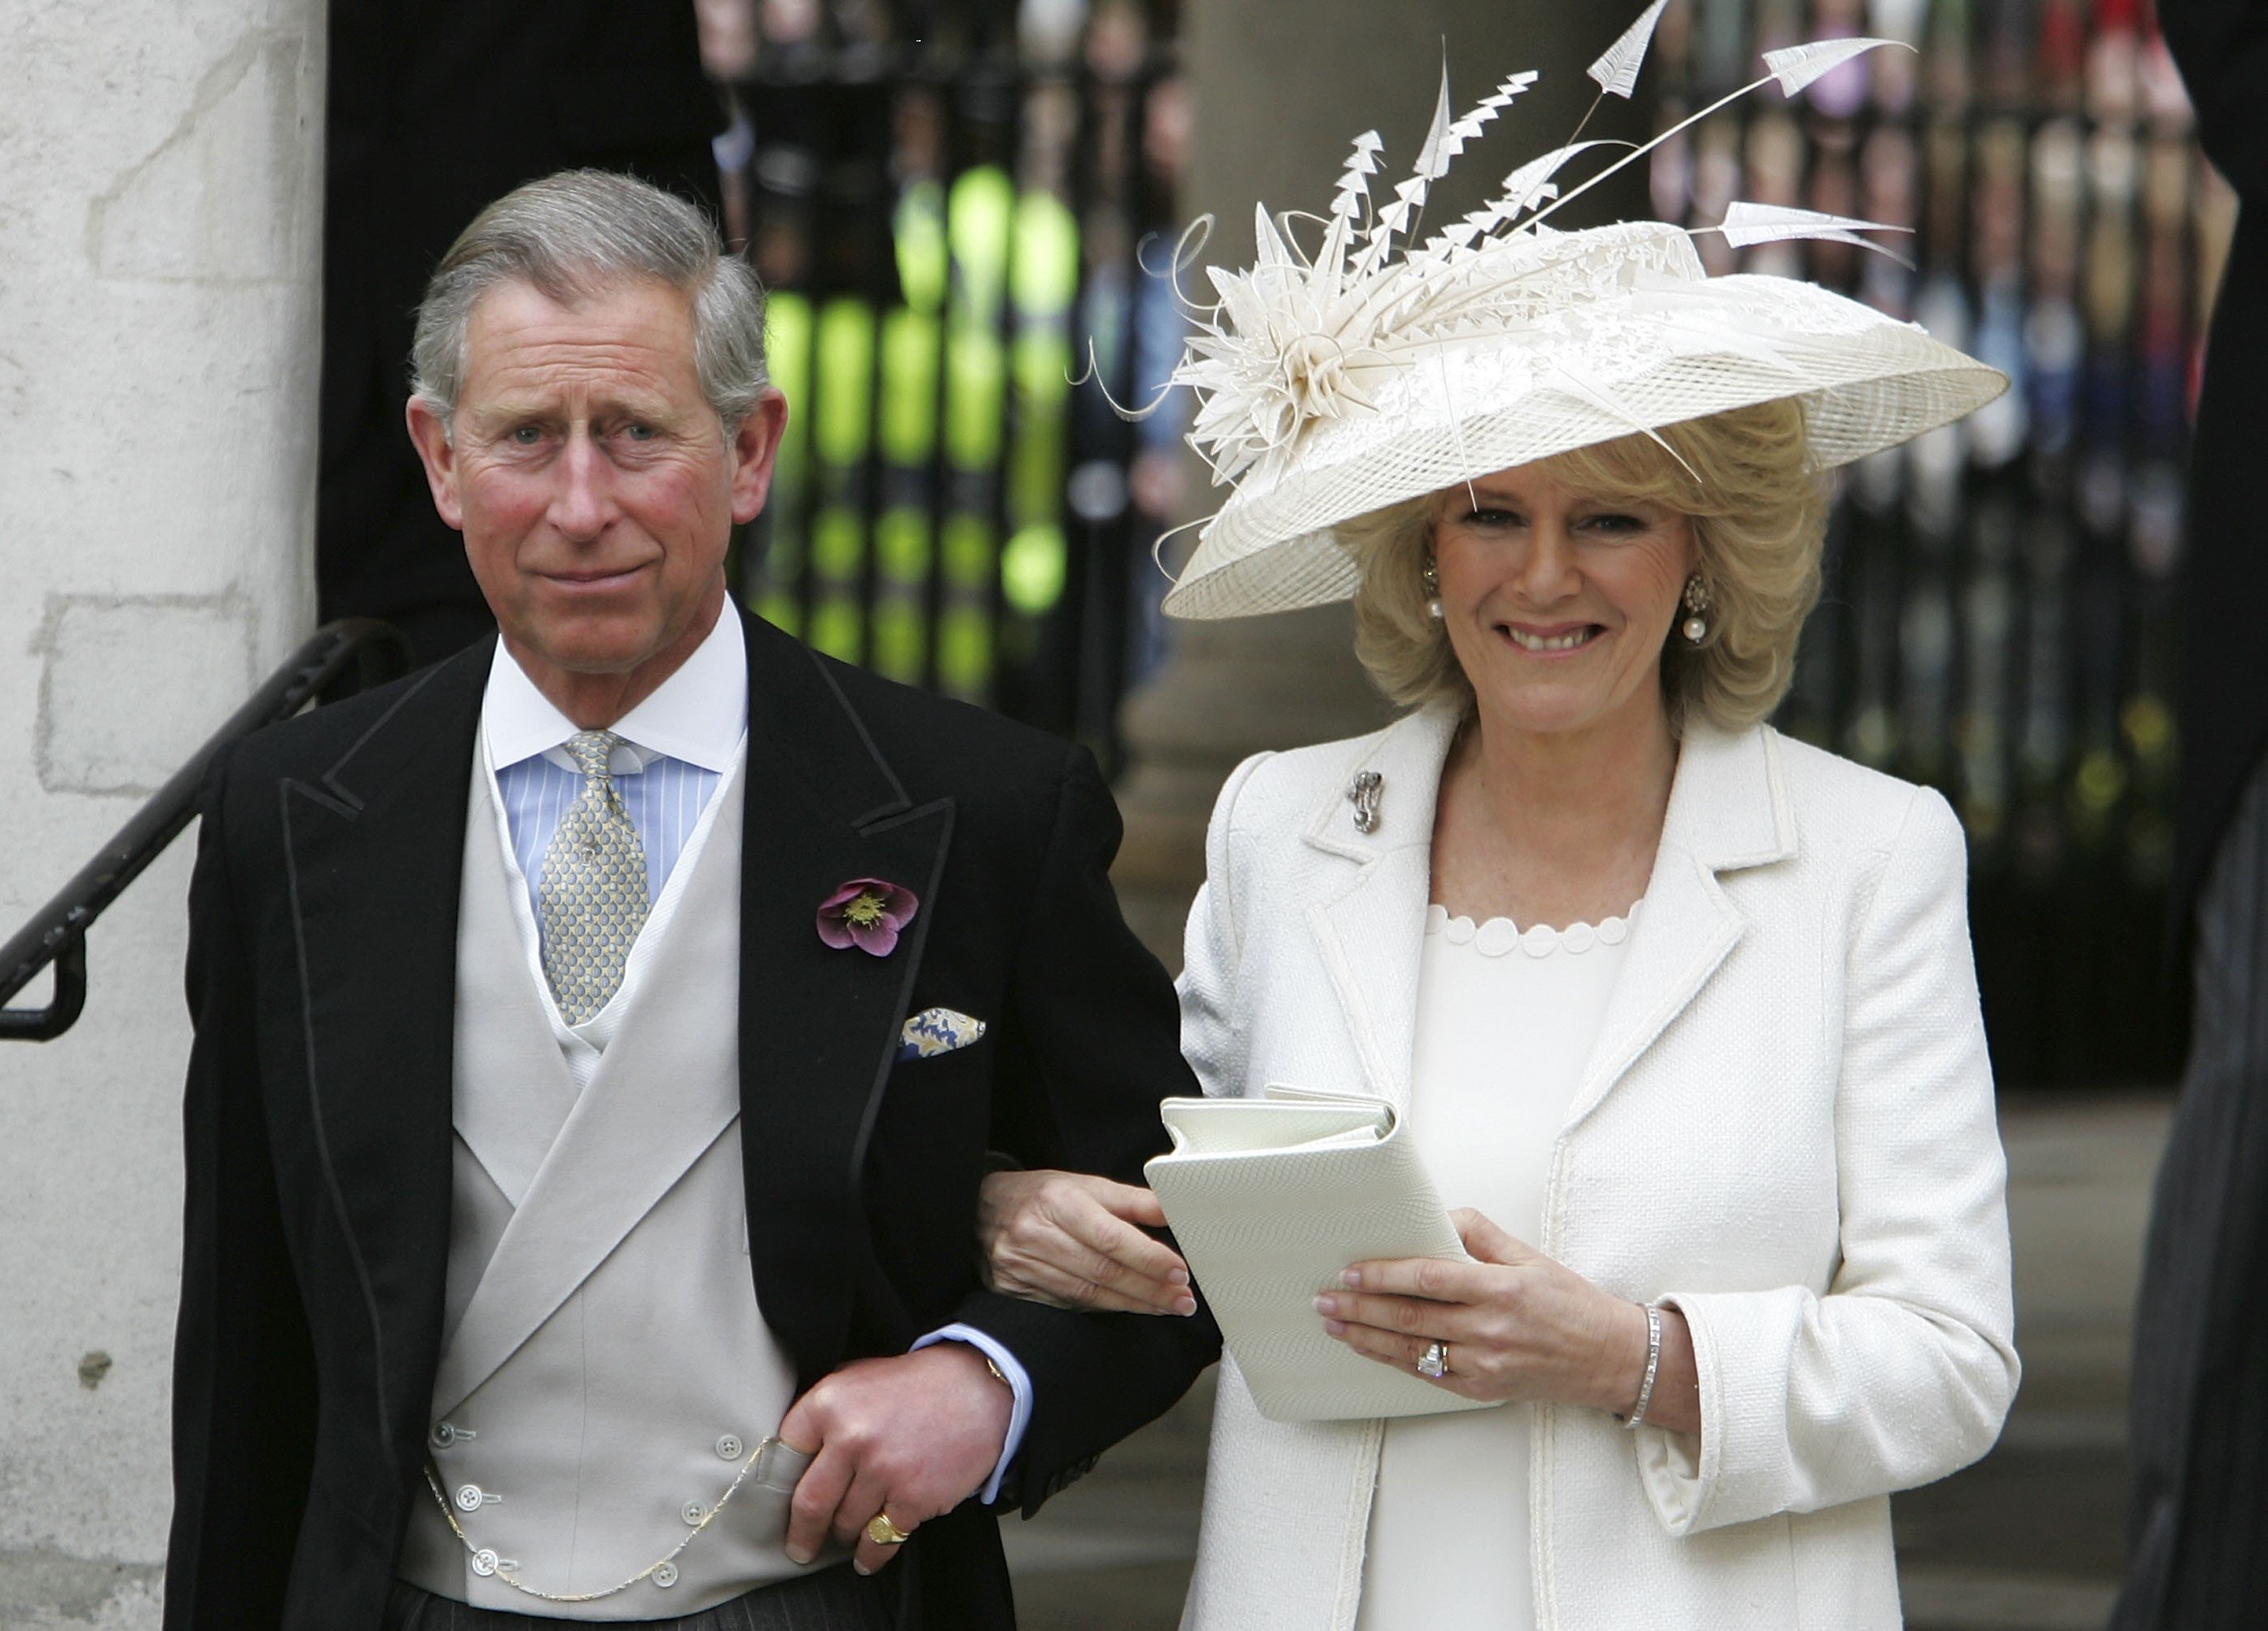 Then-Prince Charles and Camilla Parker Bowles, who refused to wear a tiara on her wedding day, depart the civil ceremony where they were legally married at The Guildhall, Windsor